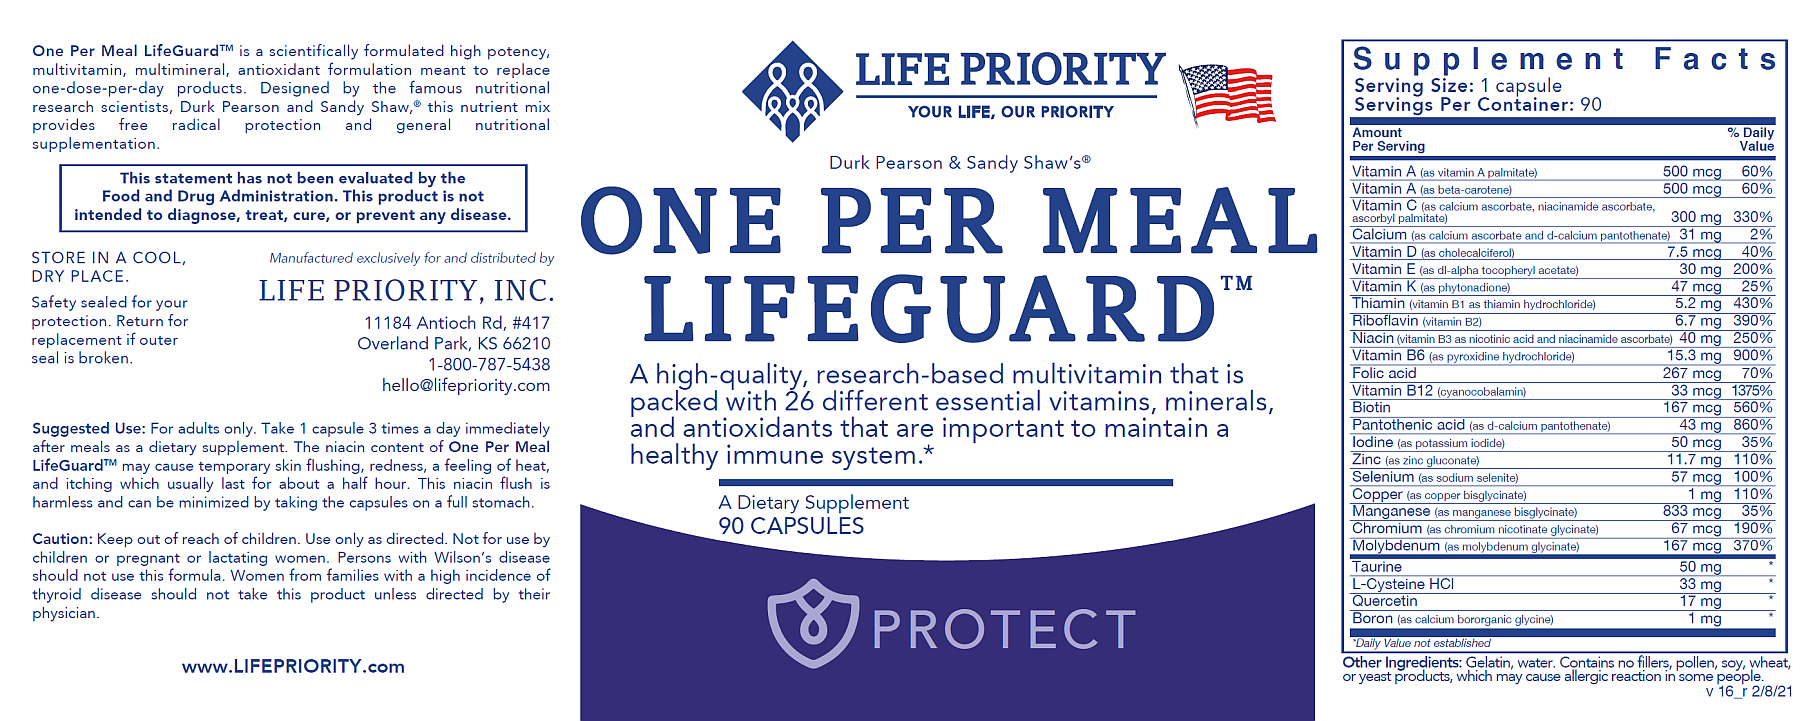 One-Per-Meal LifeGuard